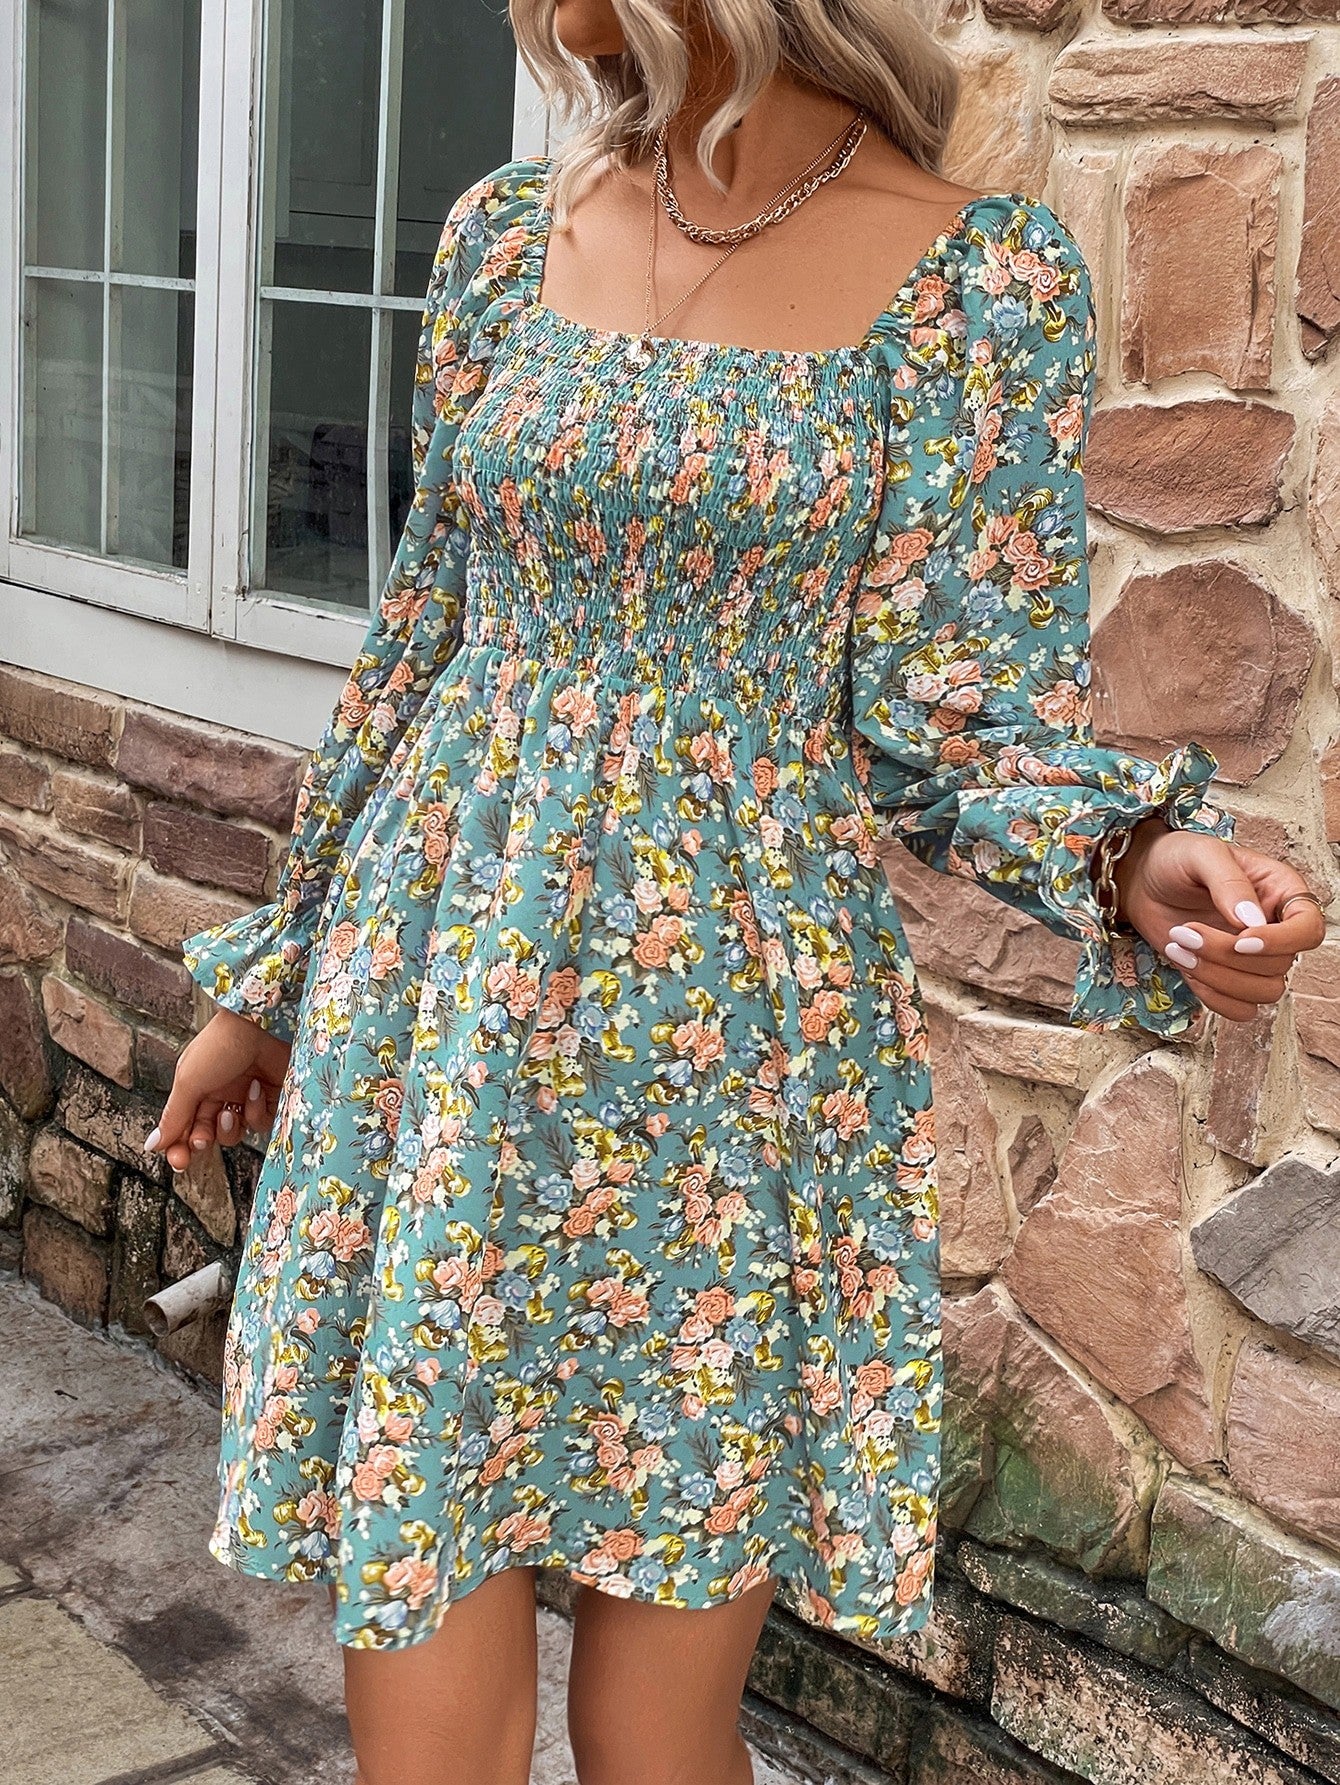 Square Neck Floral Dress: A charming dress with a square-shaped neckline adorned with floral patterns, offering a delightful and stylish look.